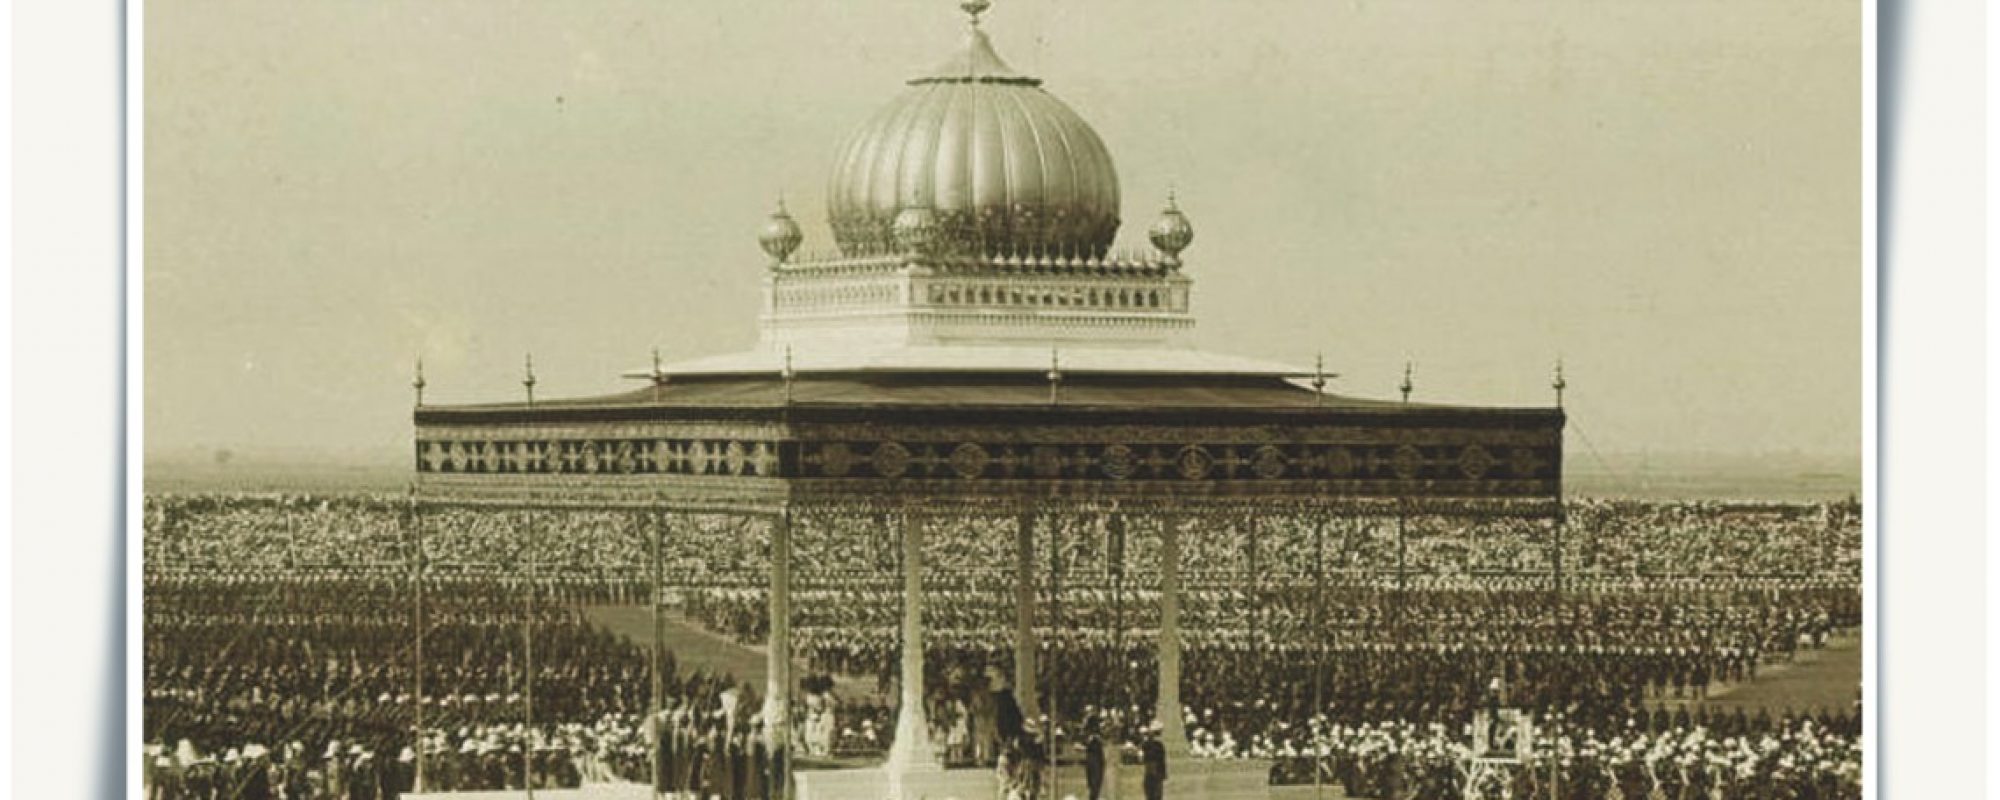 Delhi Durbar of 1911, where King George V made the historic announcement of granting statehood to Bihar